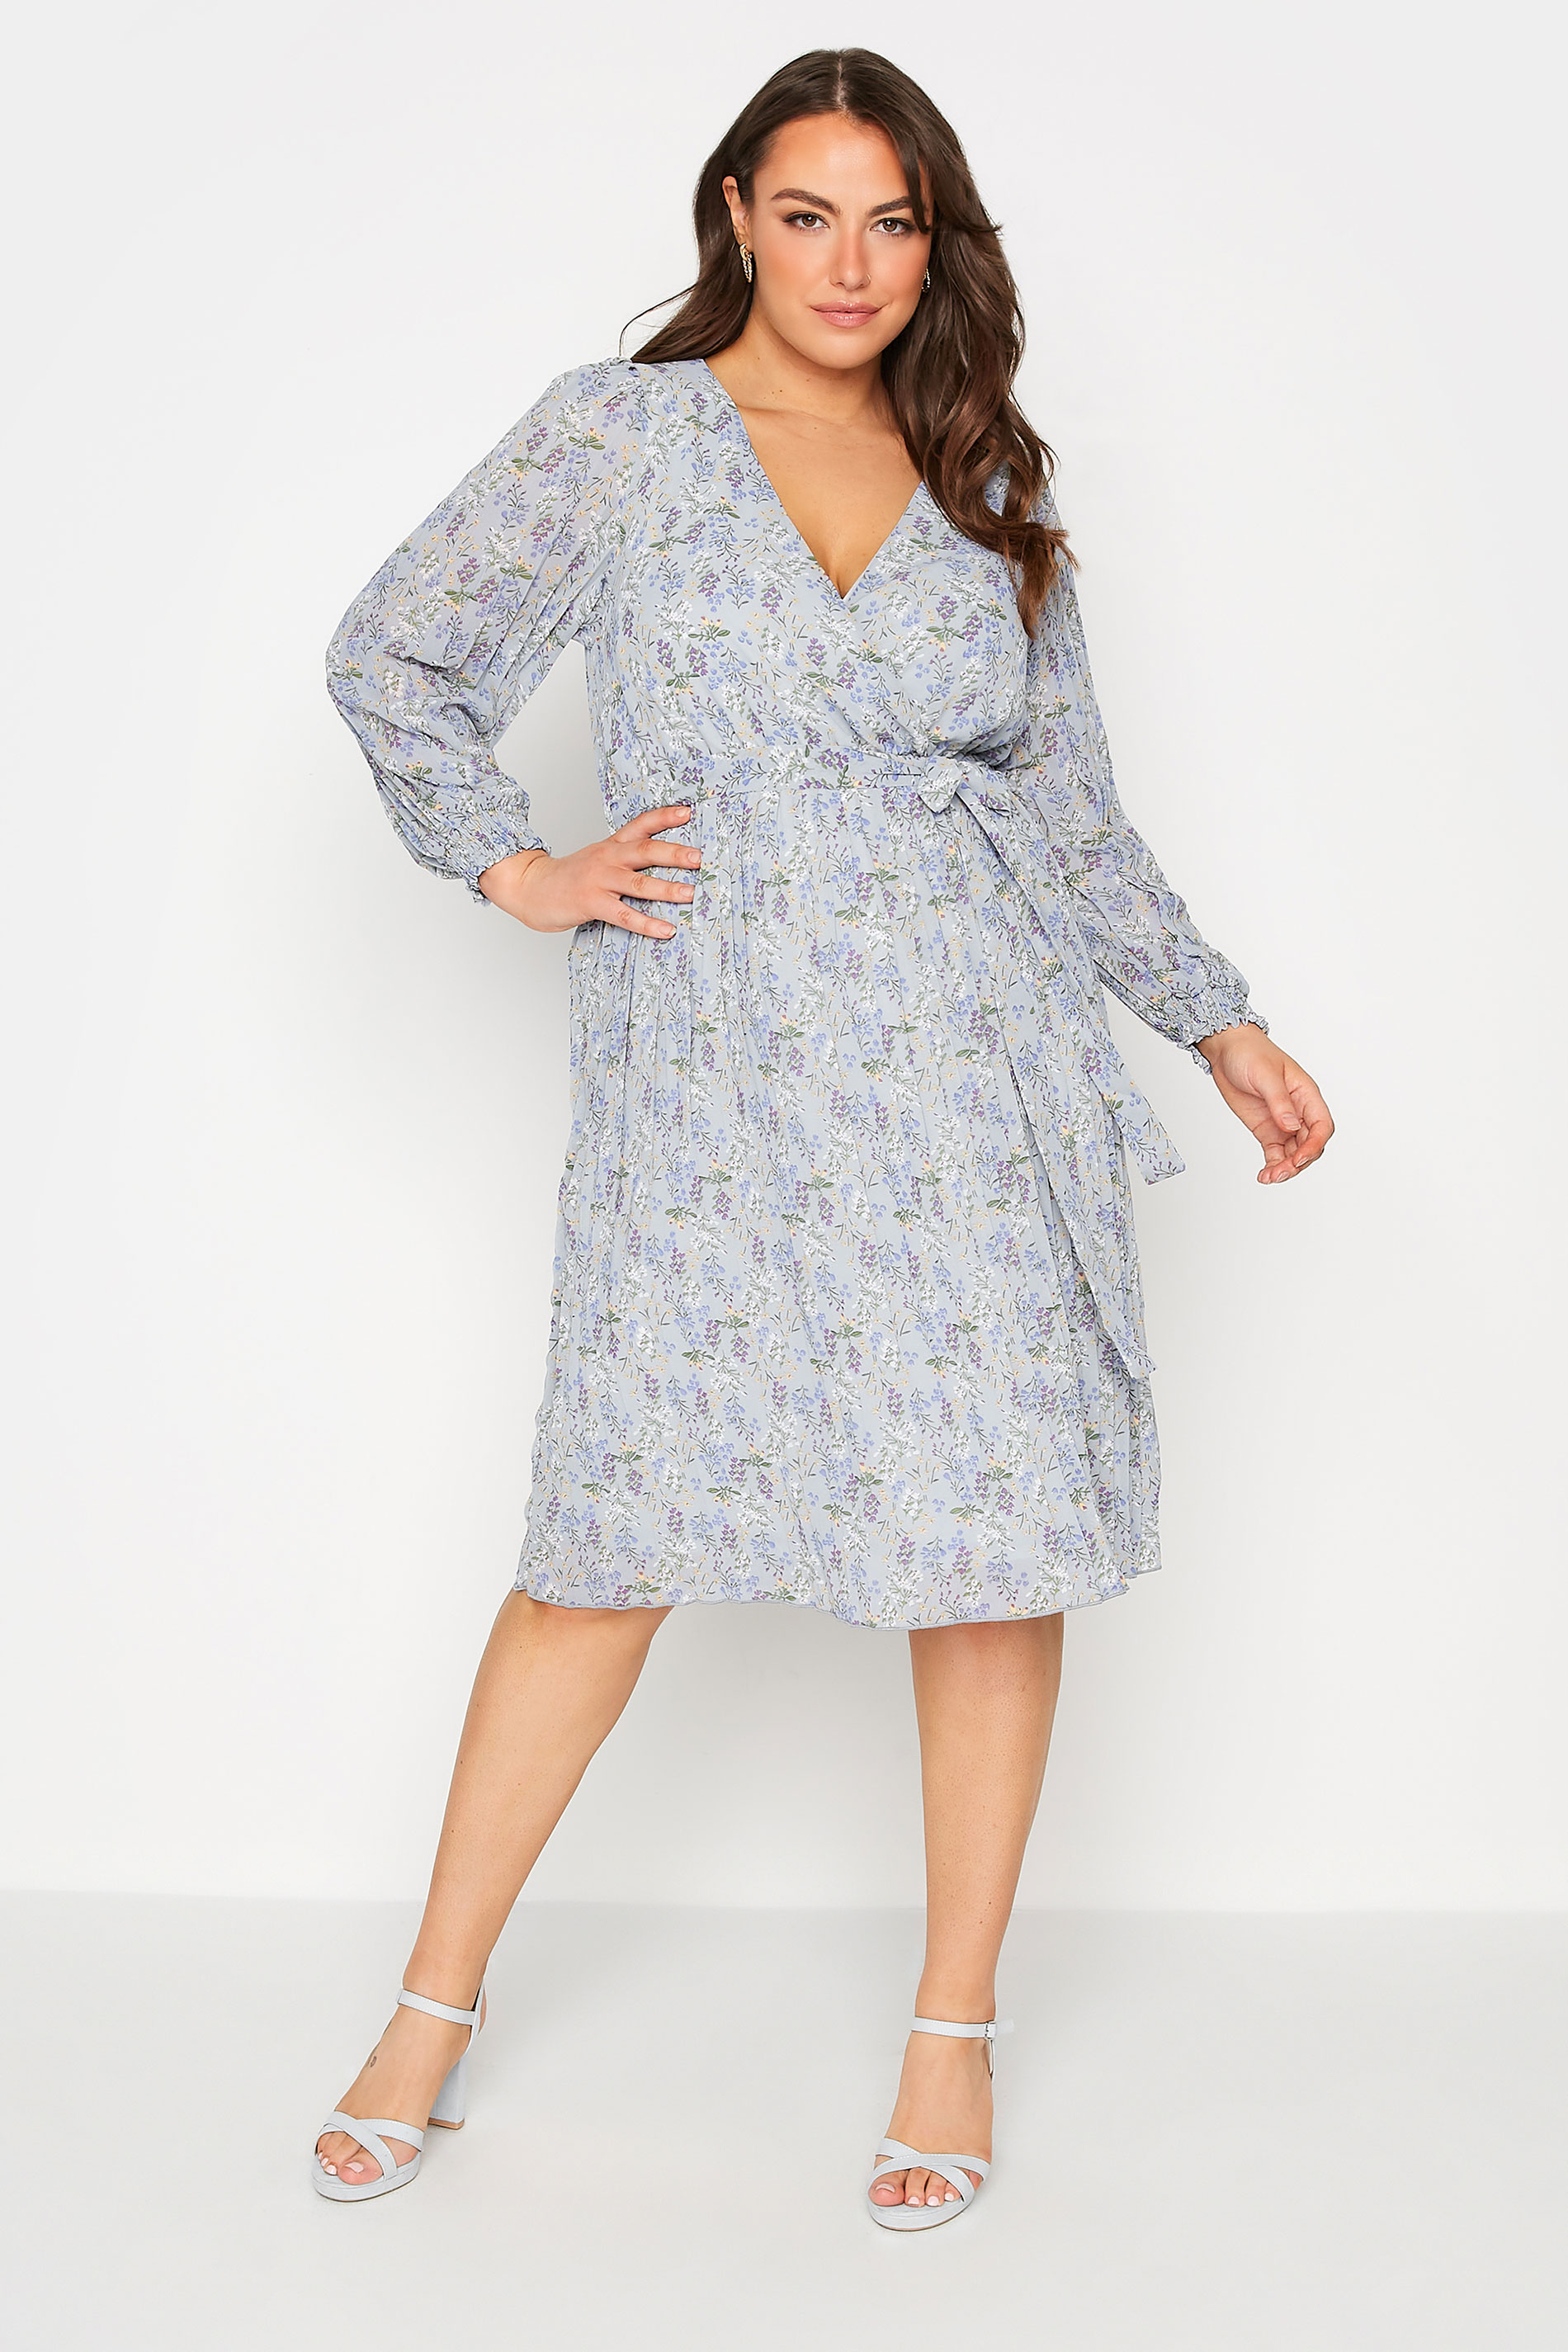 Robes Grande Taille Grande taille  Robes Occasions Spéciales | YOURS LONDON - Robe Bleue Pastel Design Cache-Coeur Floral - QP48594